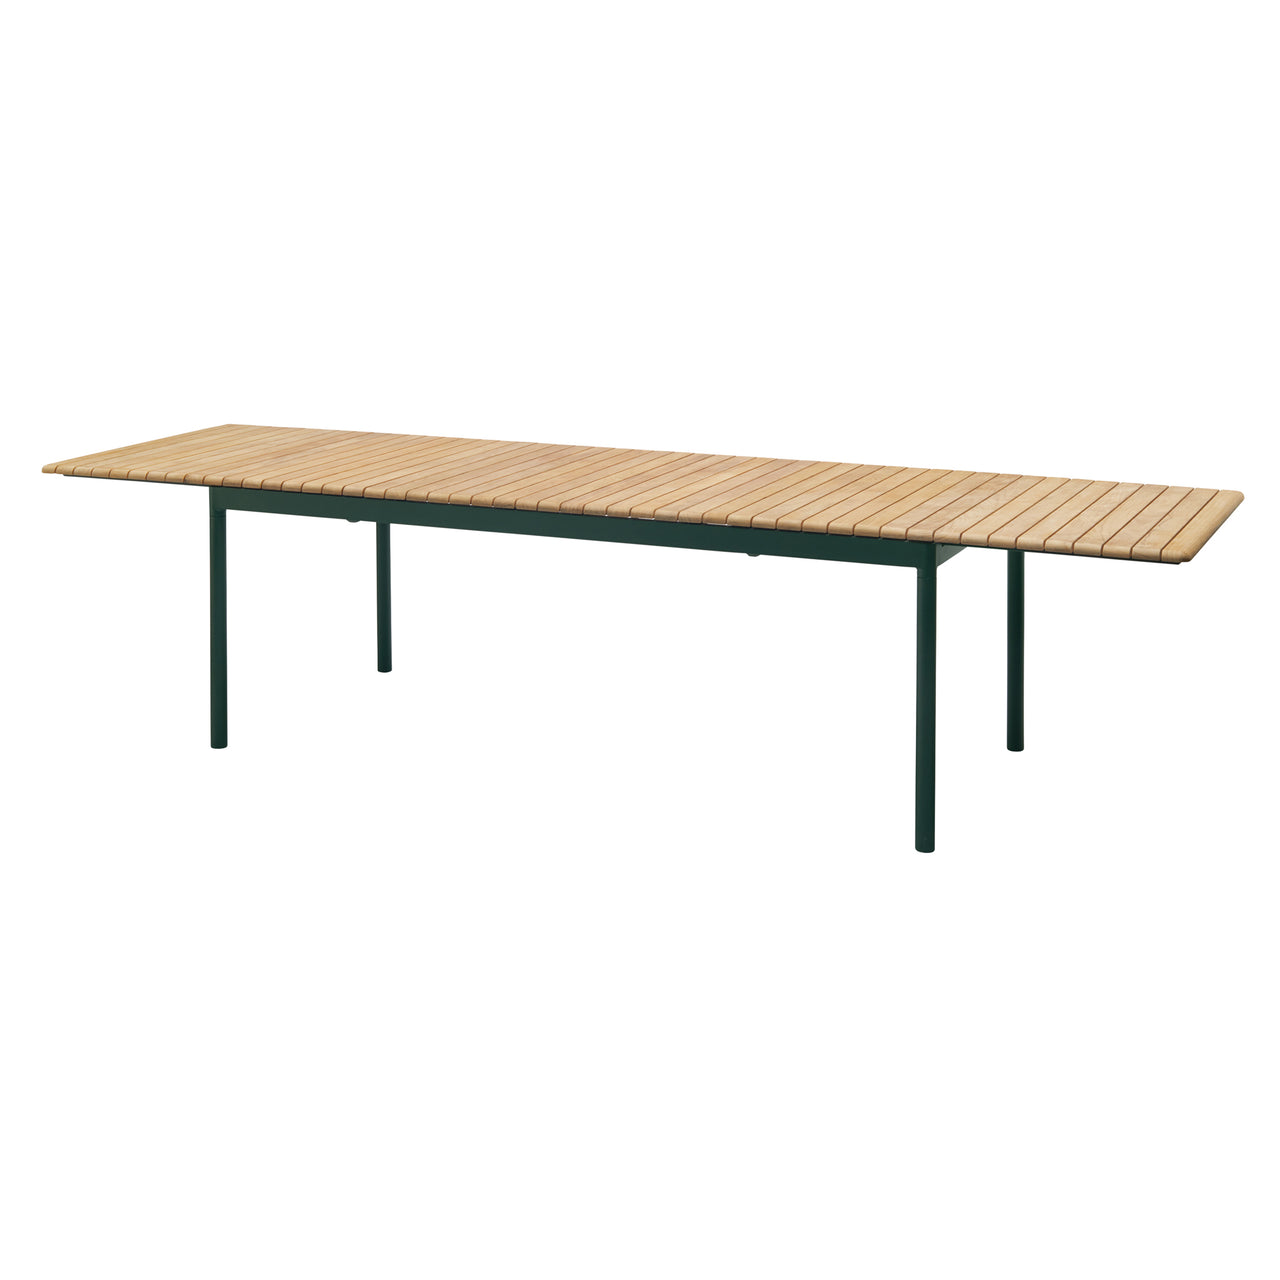 Pelagus Table: Hunter Green + With Four Extension Plate